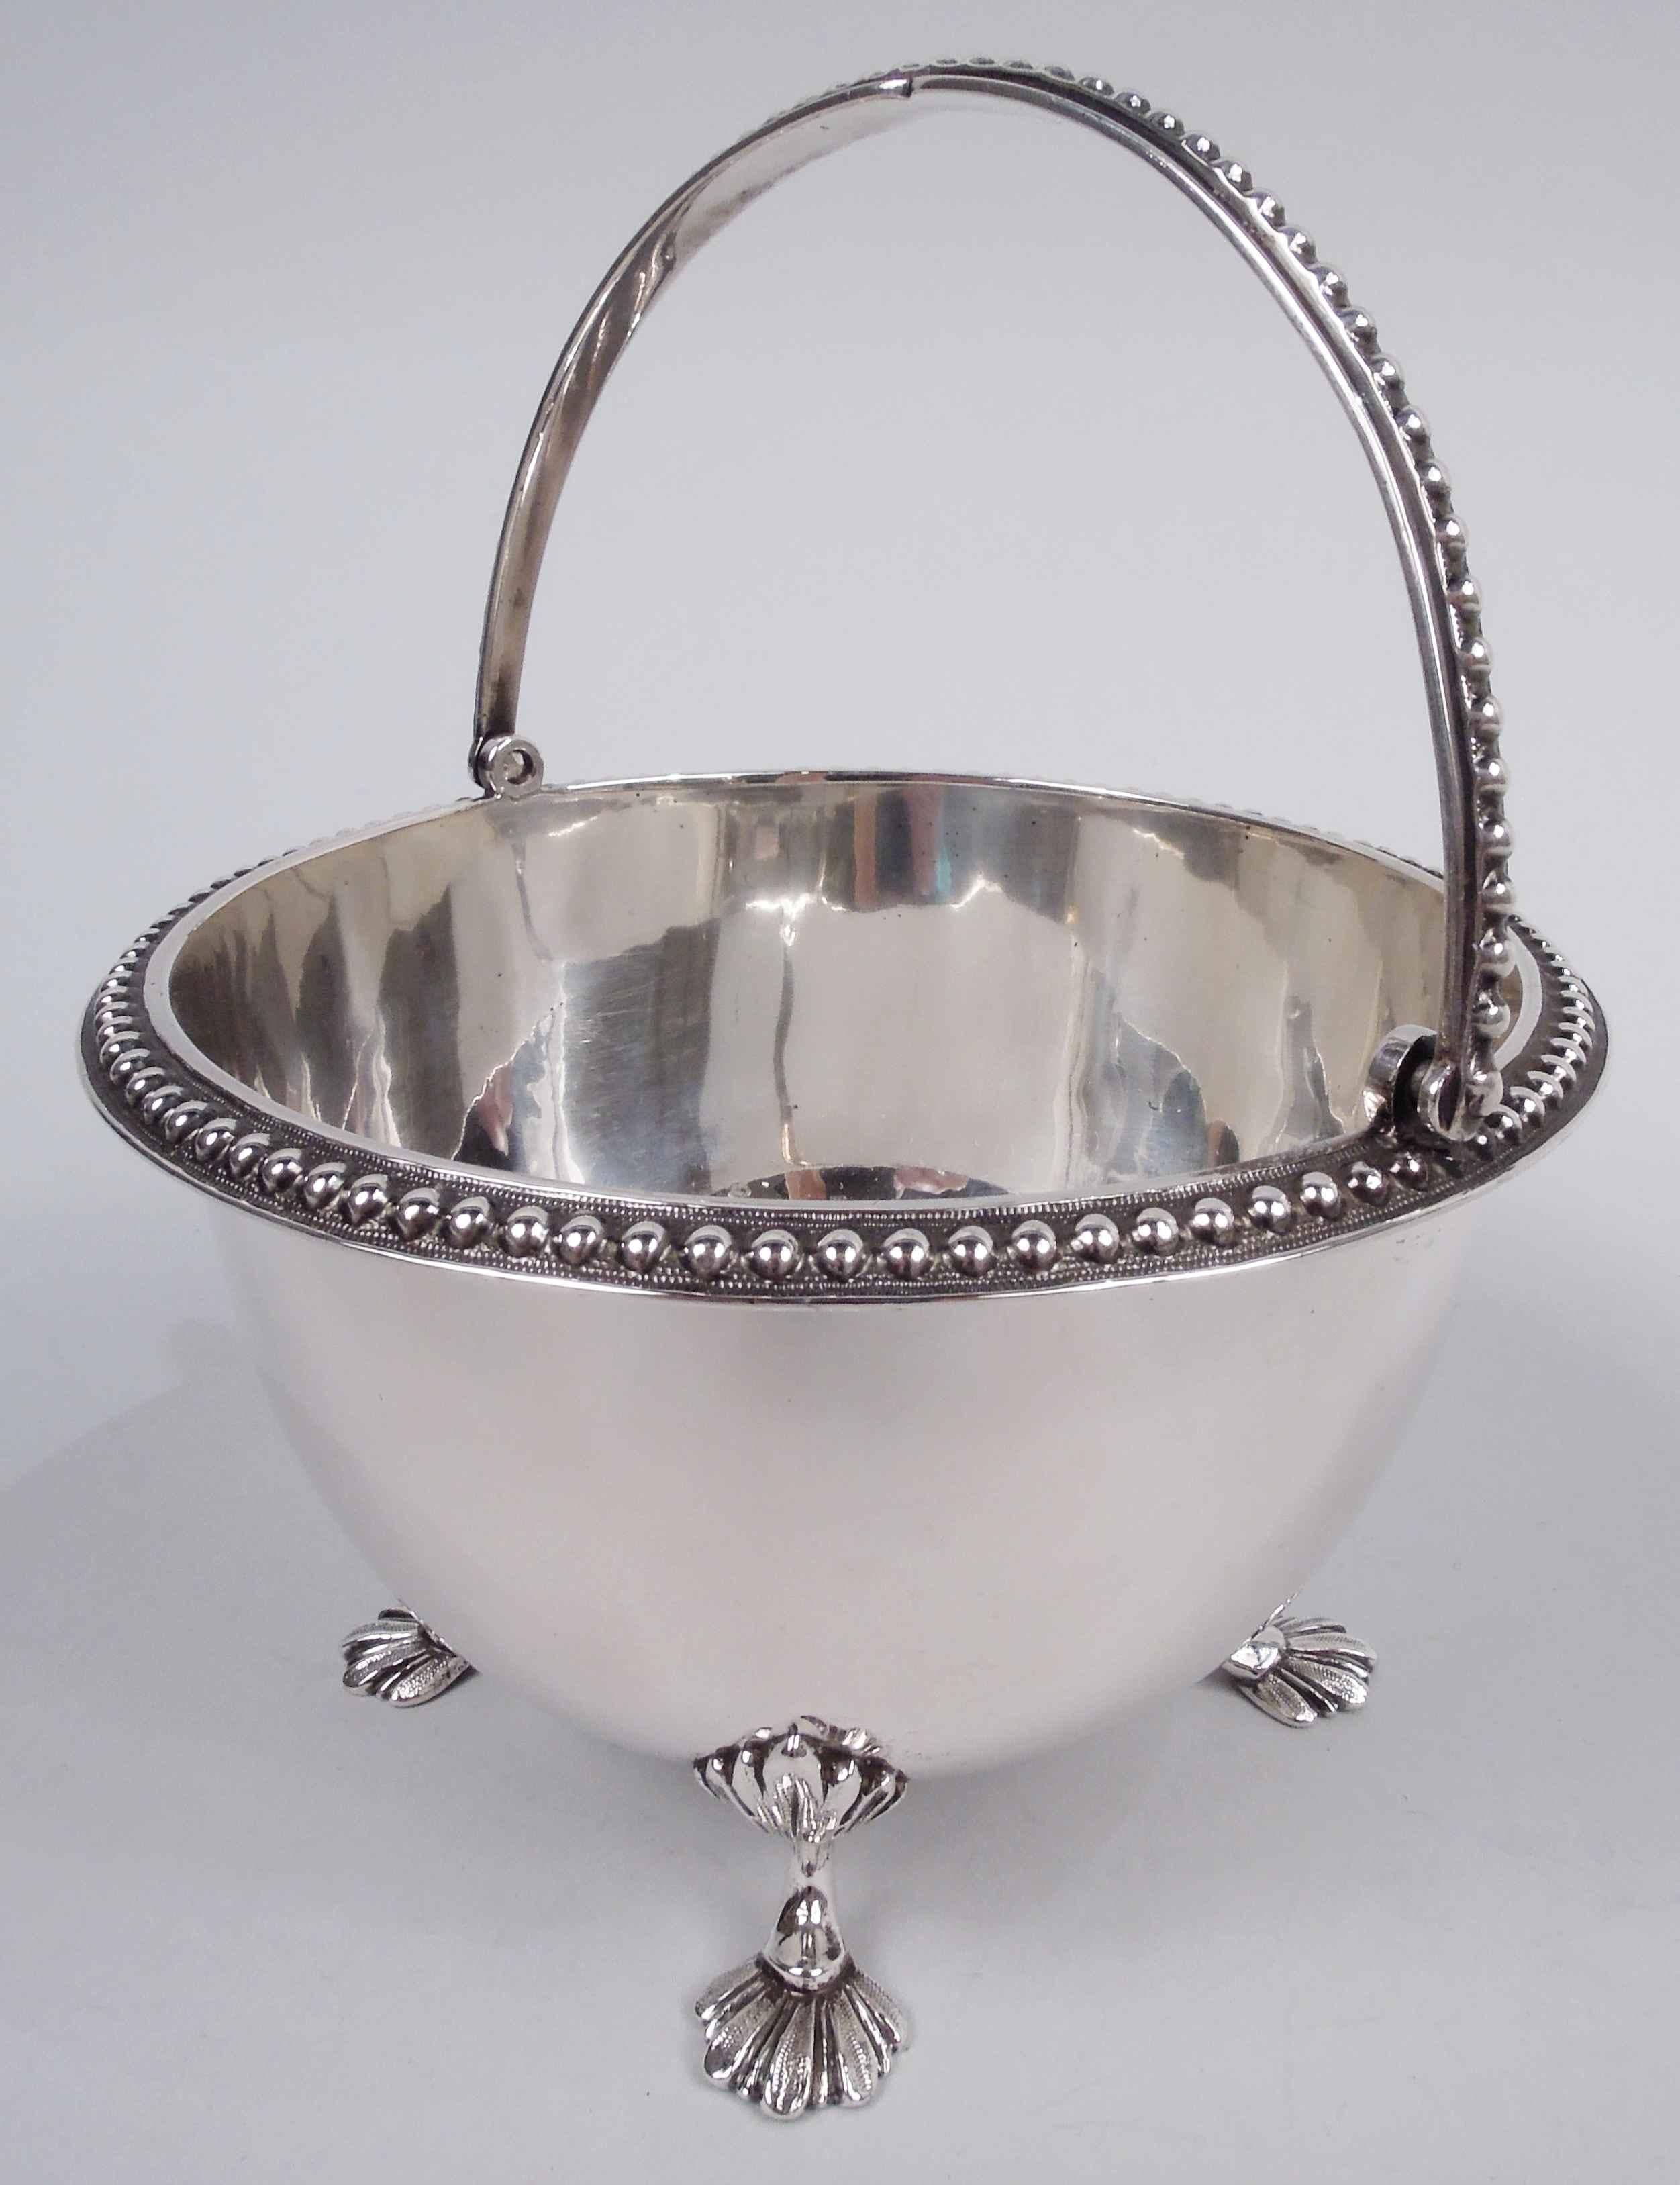 Classical coin silver basket. Made by Haddock, Lincoln & Foss in Boston, ca 1860. Round and curved with four cast leaf-mounted leaf supports. Beaded mouth rim and c-scroll swing handle. Marked with maker’s stamp. Weight: 8.2 troy ounces. 